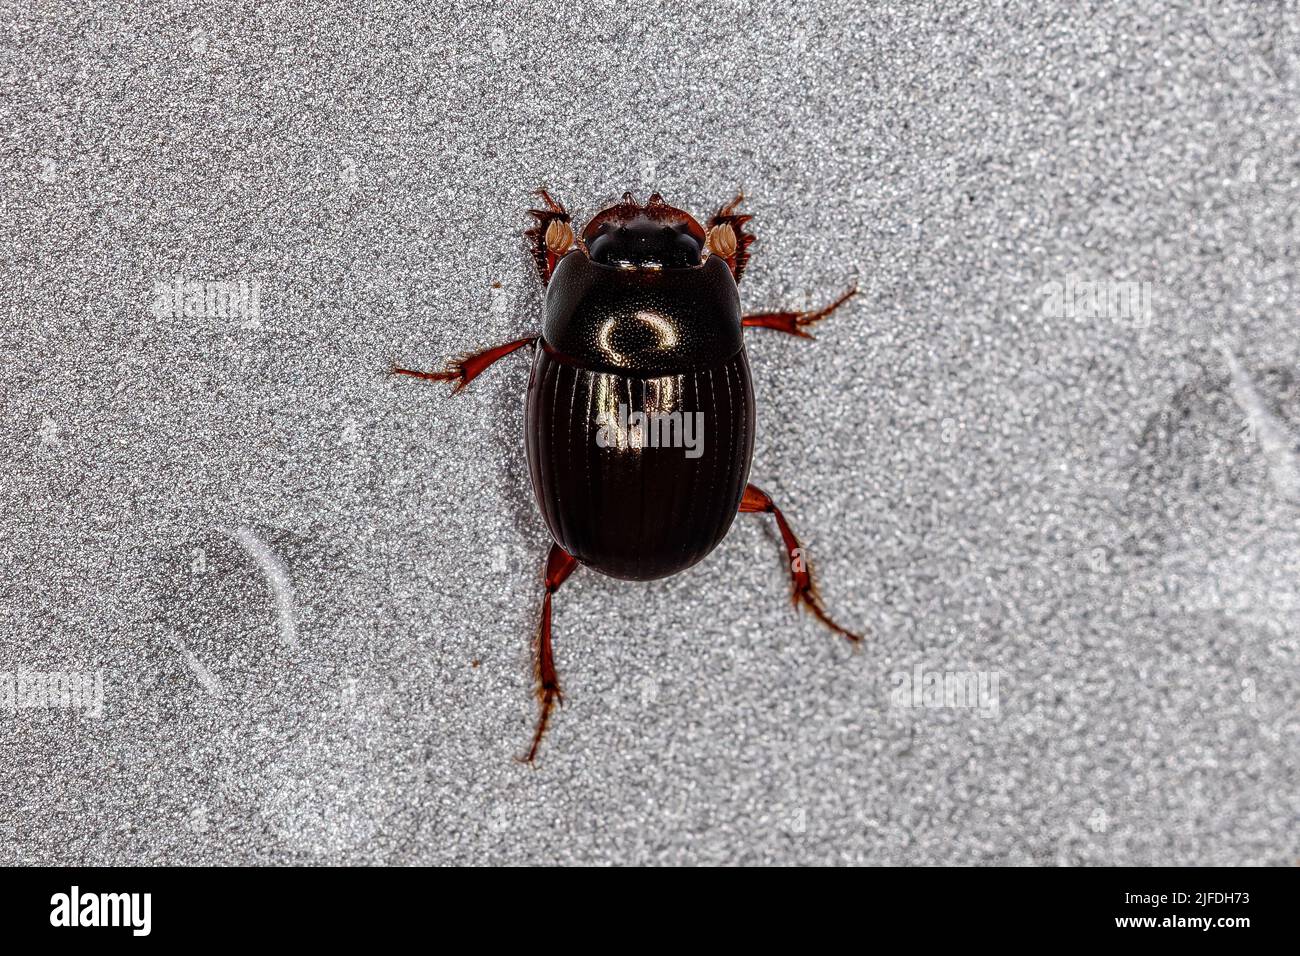 Adult Small Dung Beetle of the Subfamily Scarabaeinae Stock Photo